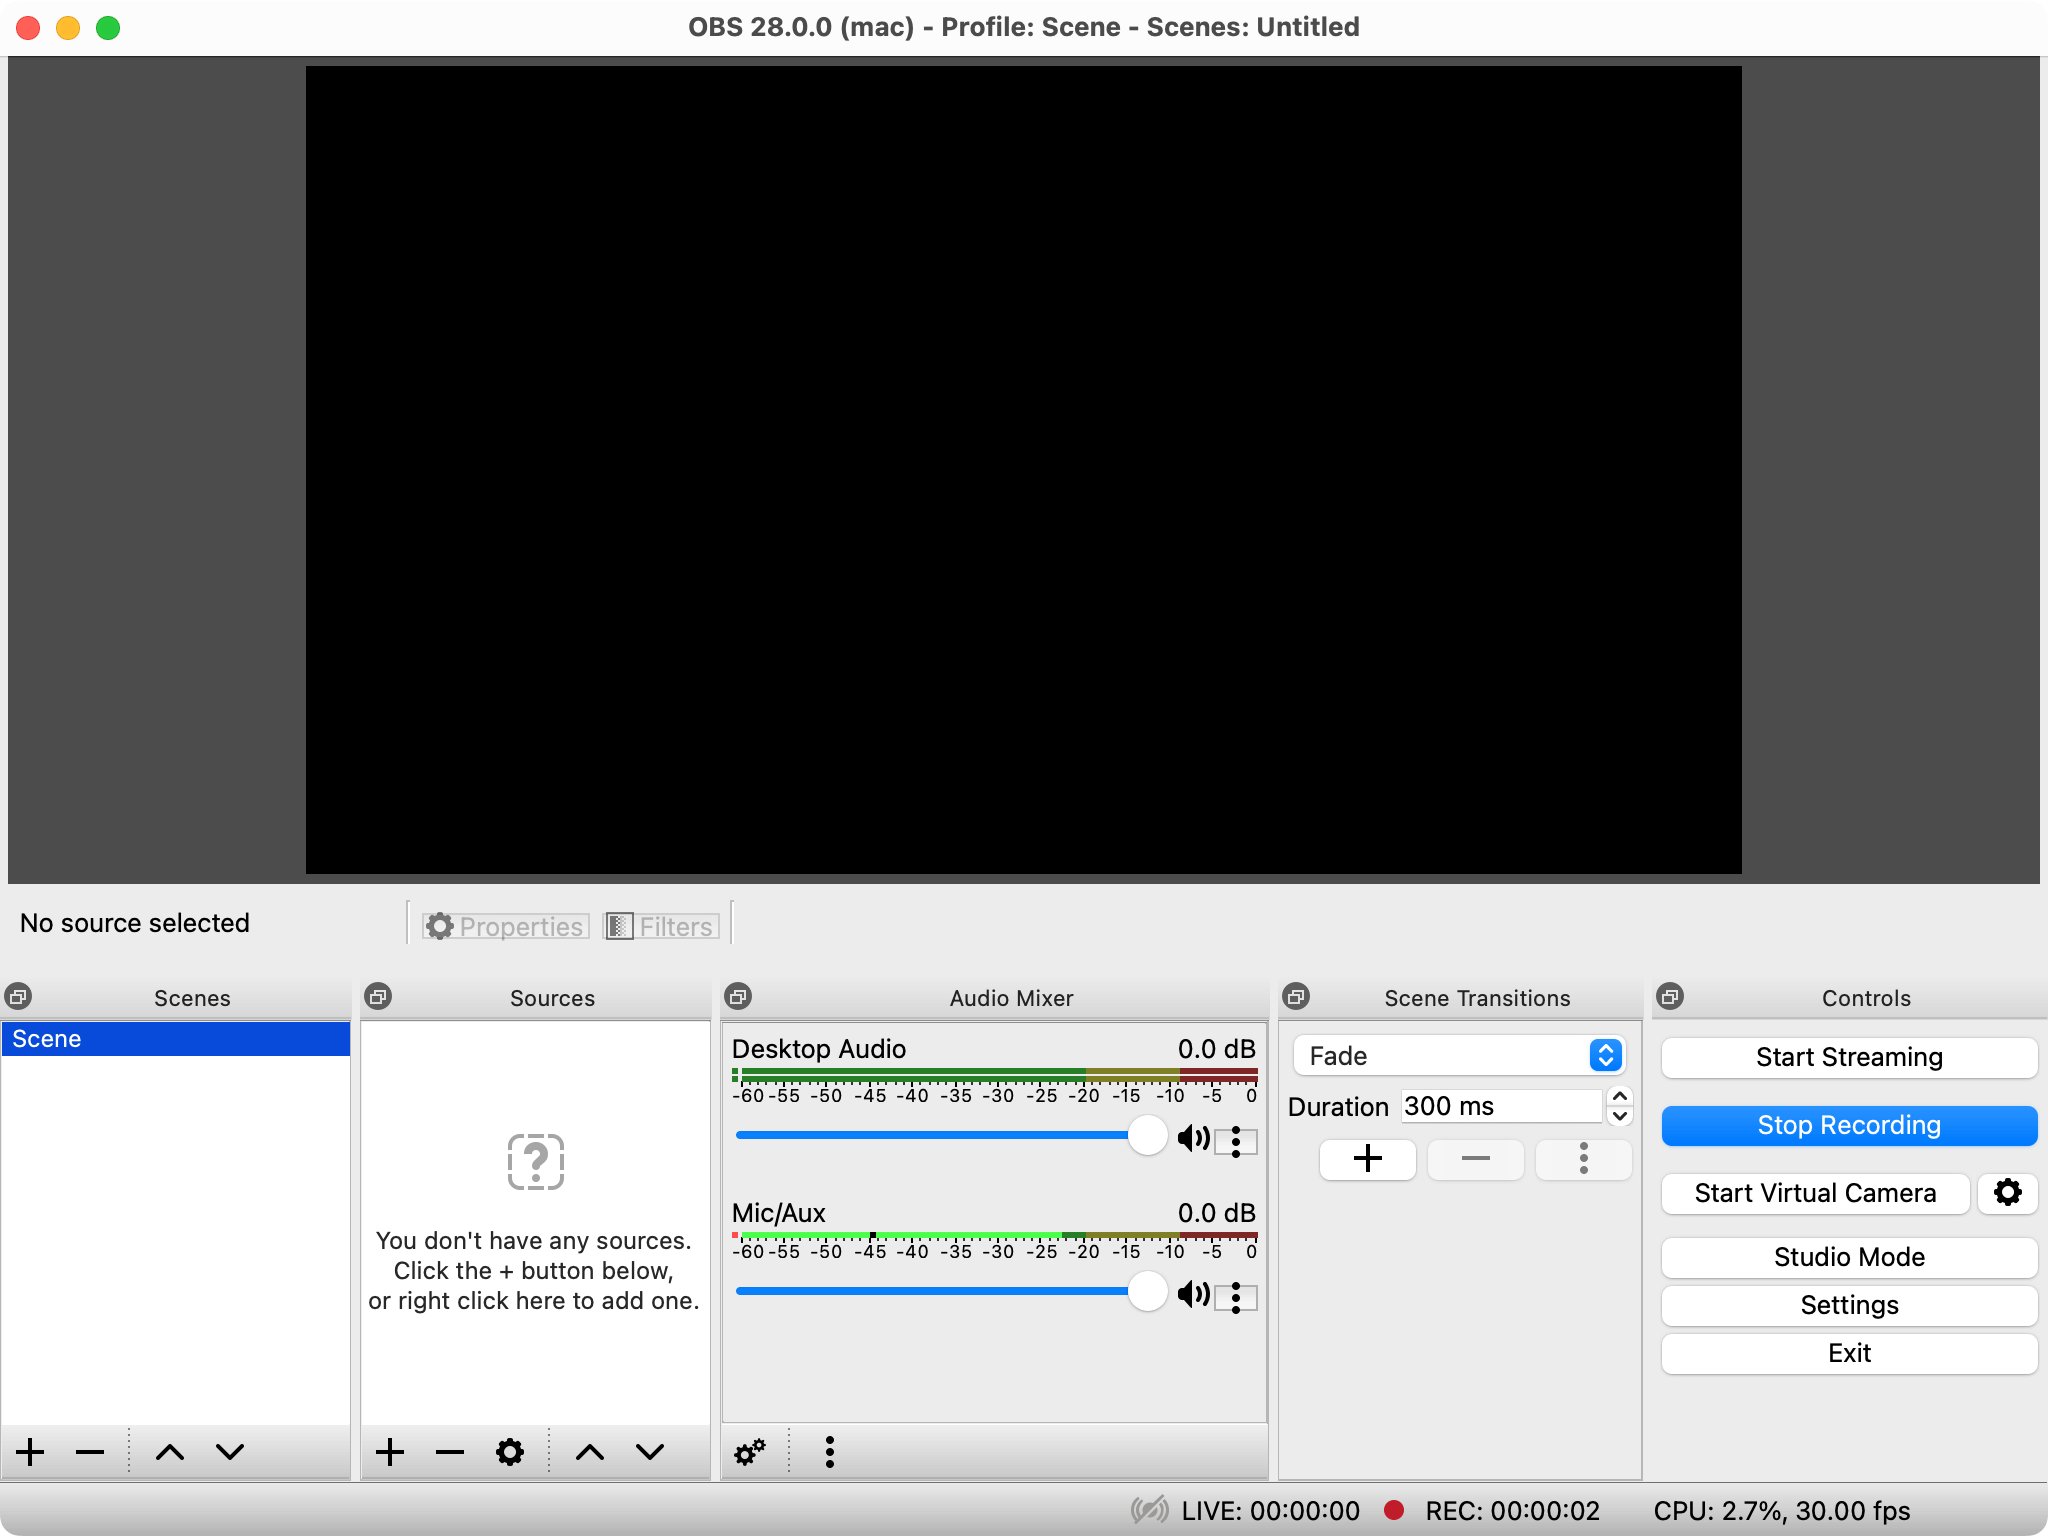 OBS Studio's main window showing the System theme on macOS